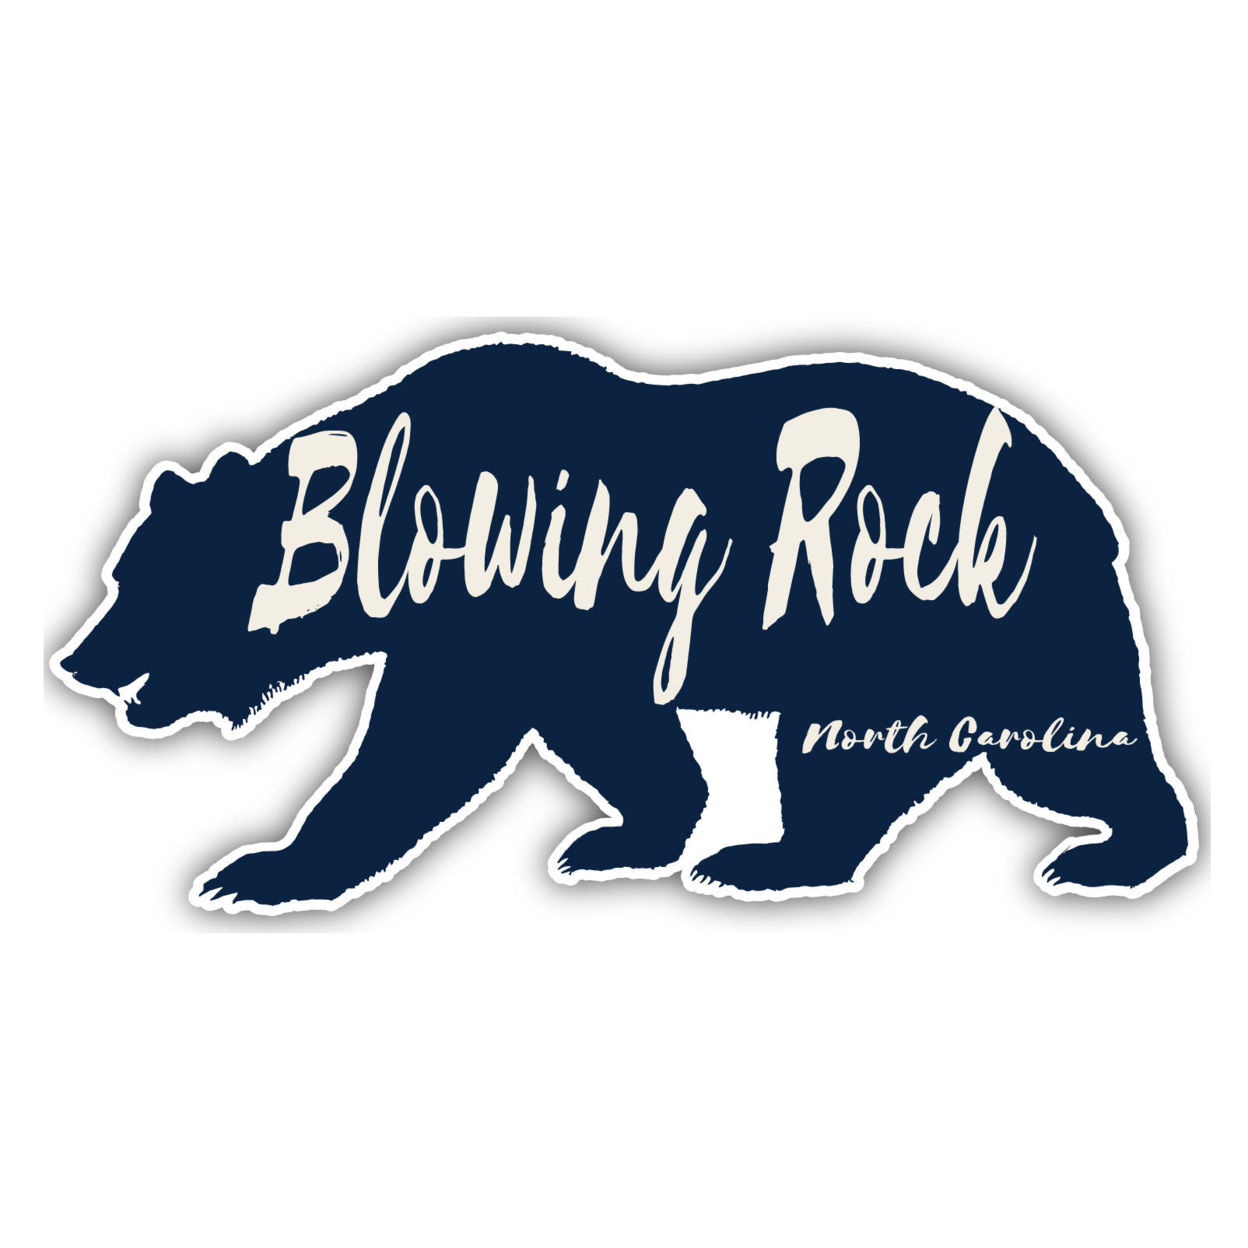 Blowing Rock North Carolina Souvenir Decorative Stickers (Choose Theme And Size) - 4-Pack, 12-Inch, Bear